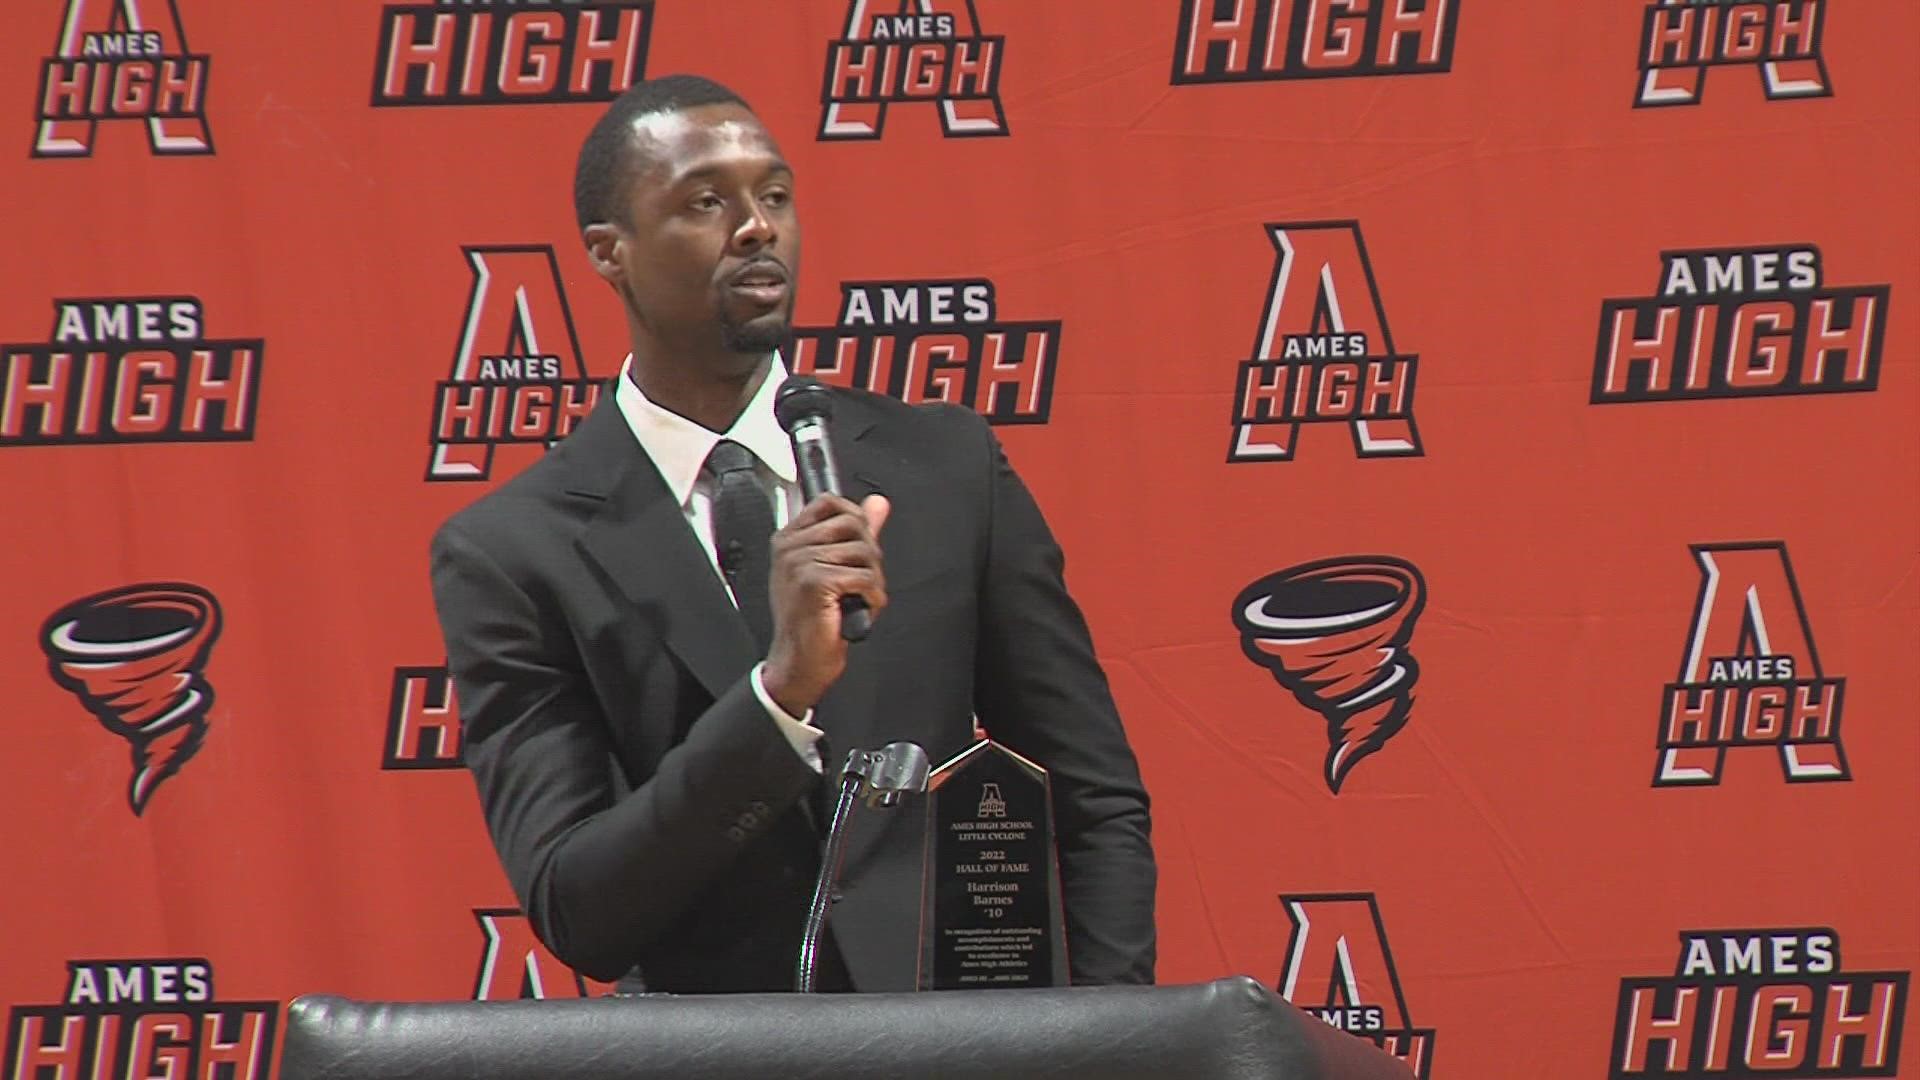 In addition to dedicating the gym and court to Barnes, he was also inducted into the Ames High School Hall of Fame.